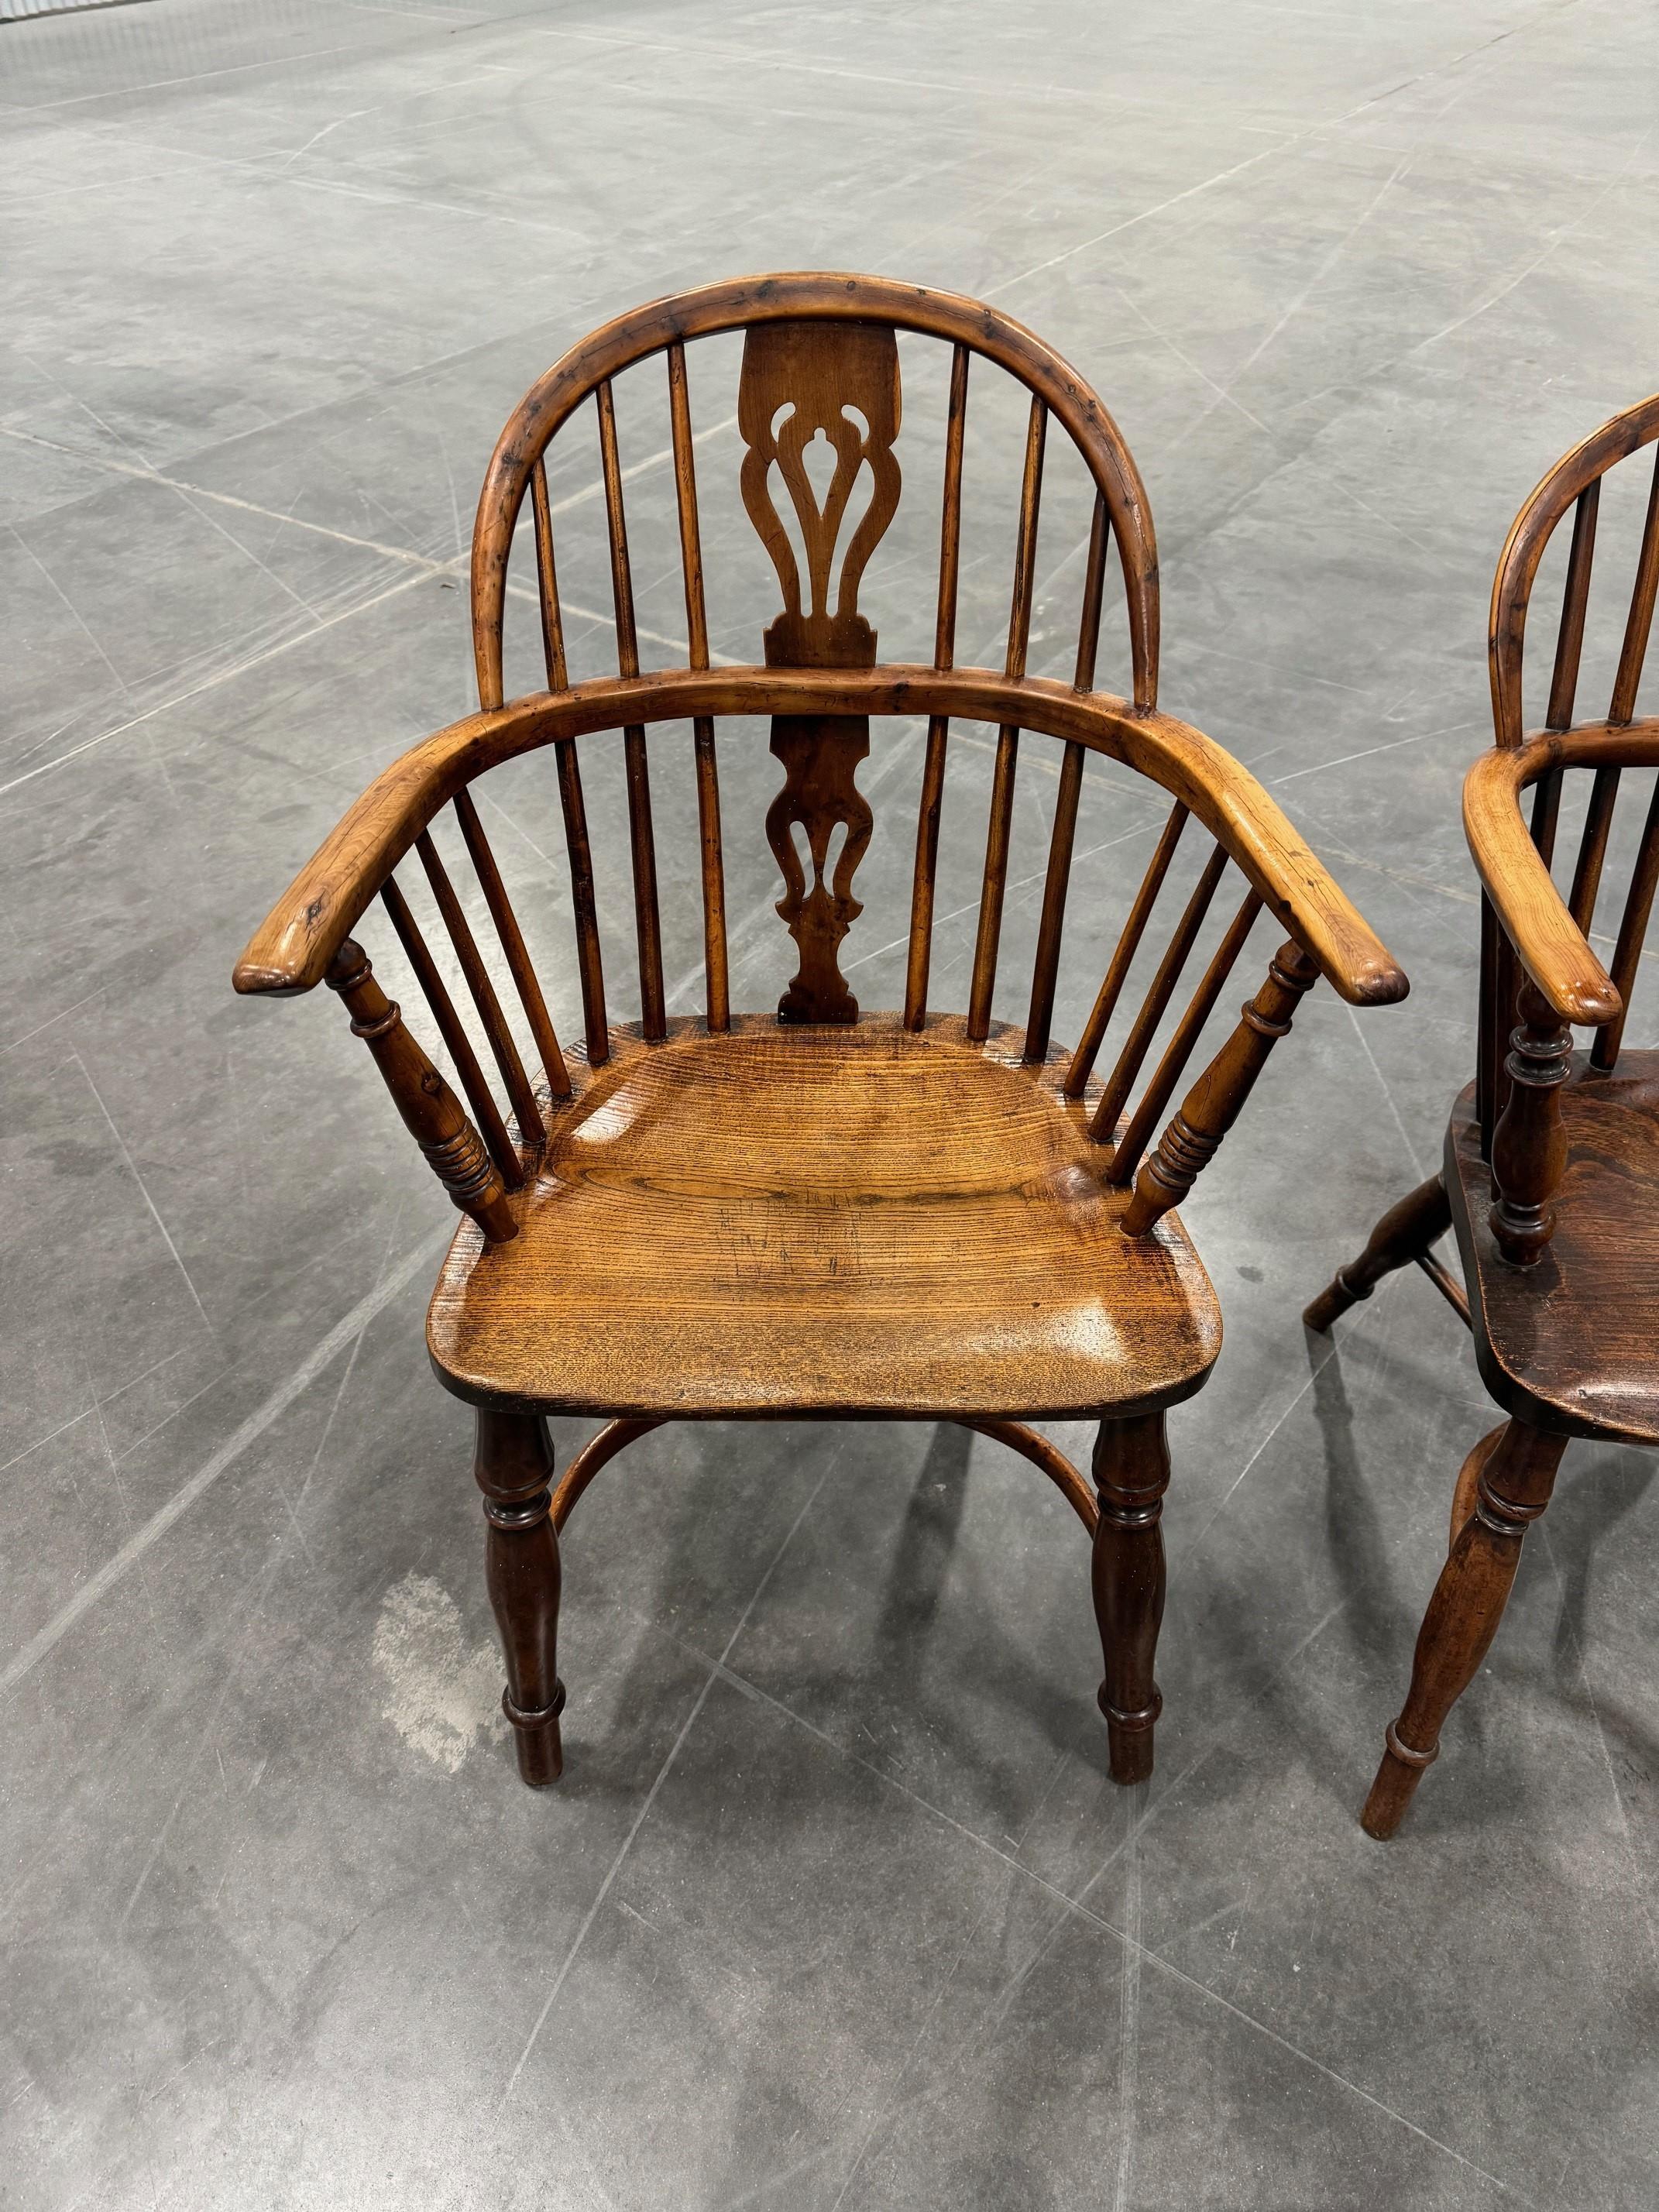 A wonderful matching pair of early Victorian Low back Yew wood and Elm  Windsor Chairs.
With turned arm supports, splat back and a carved trace outline all around the edge of the seat. The mortised back spindles are all in good shape. The baluster